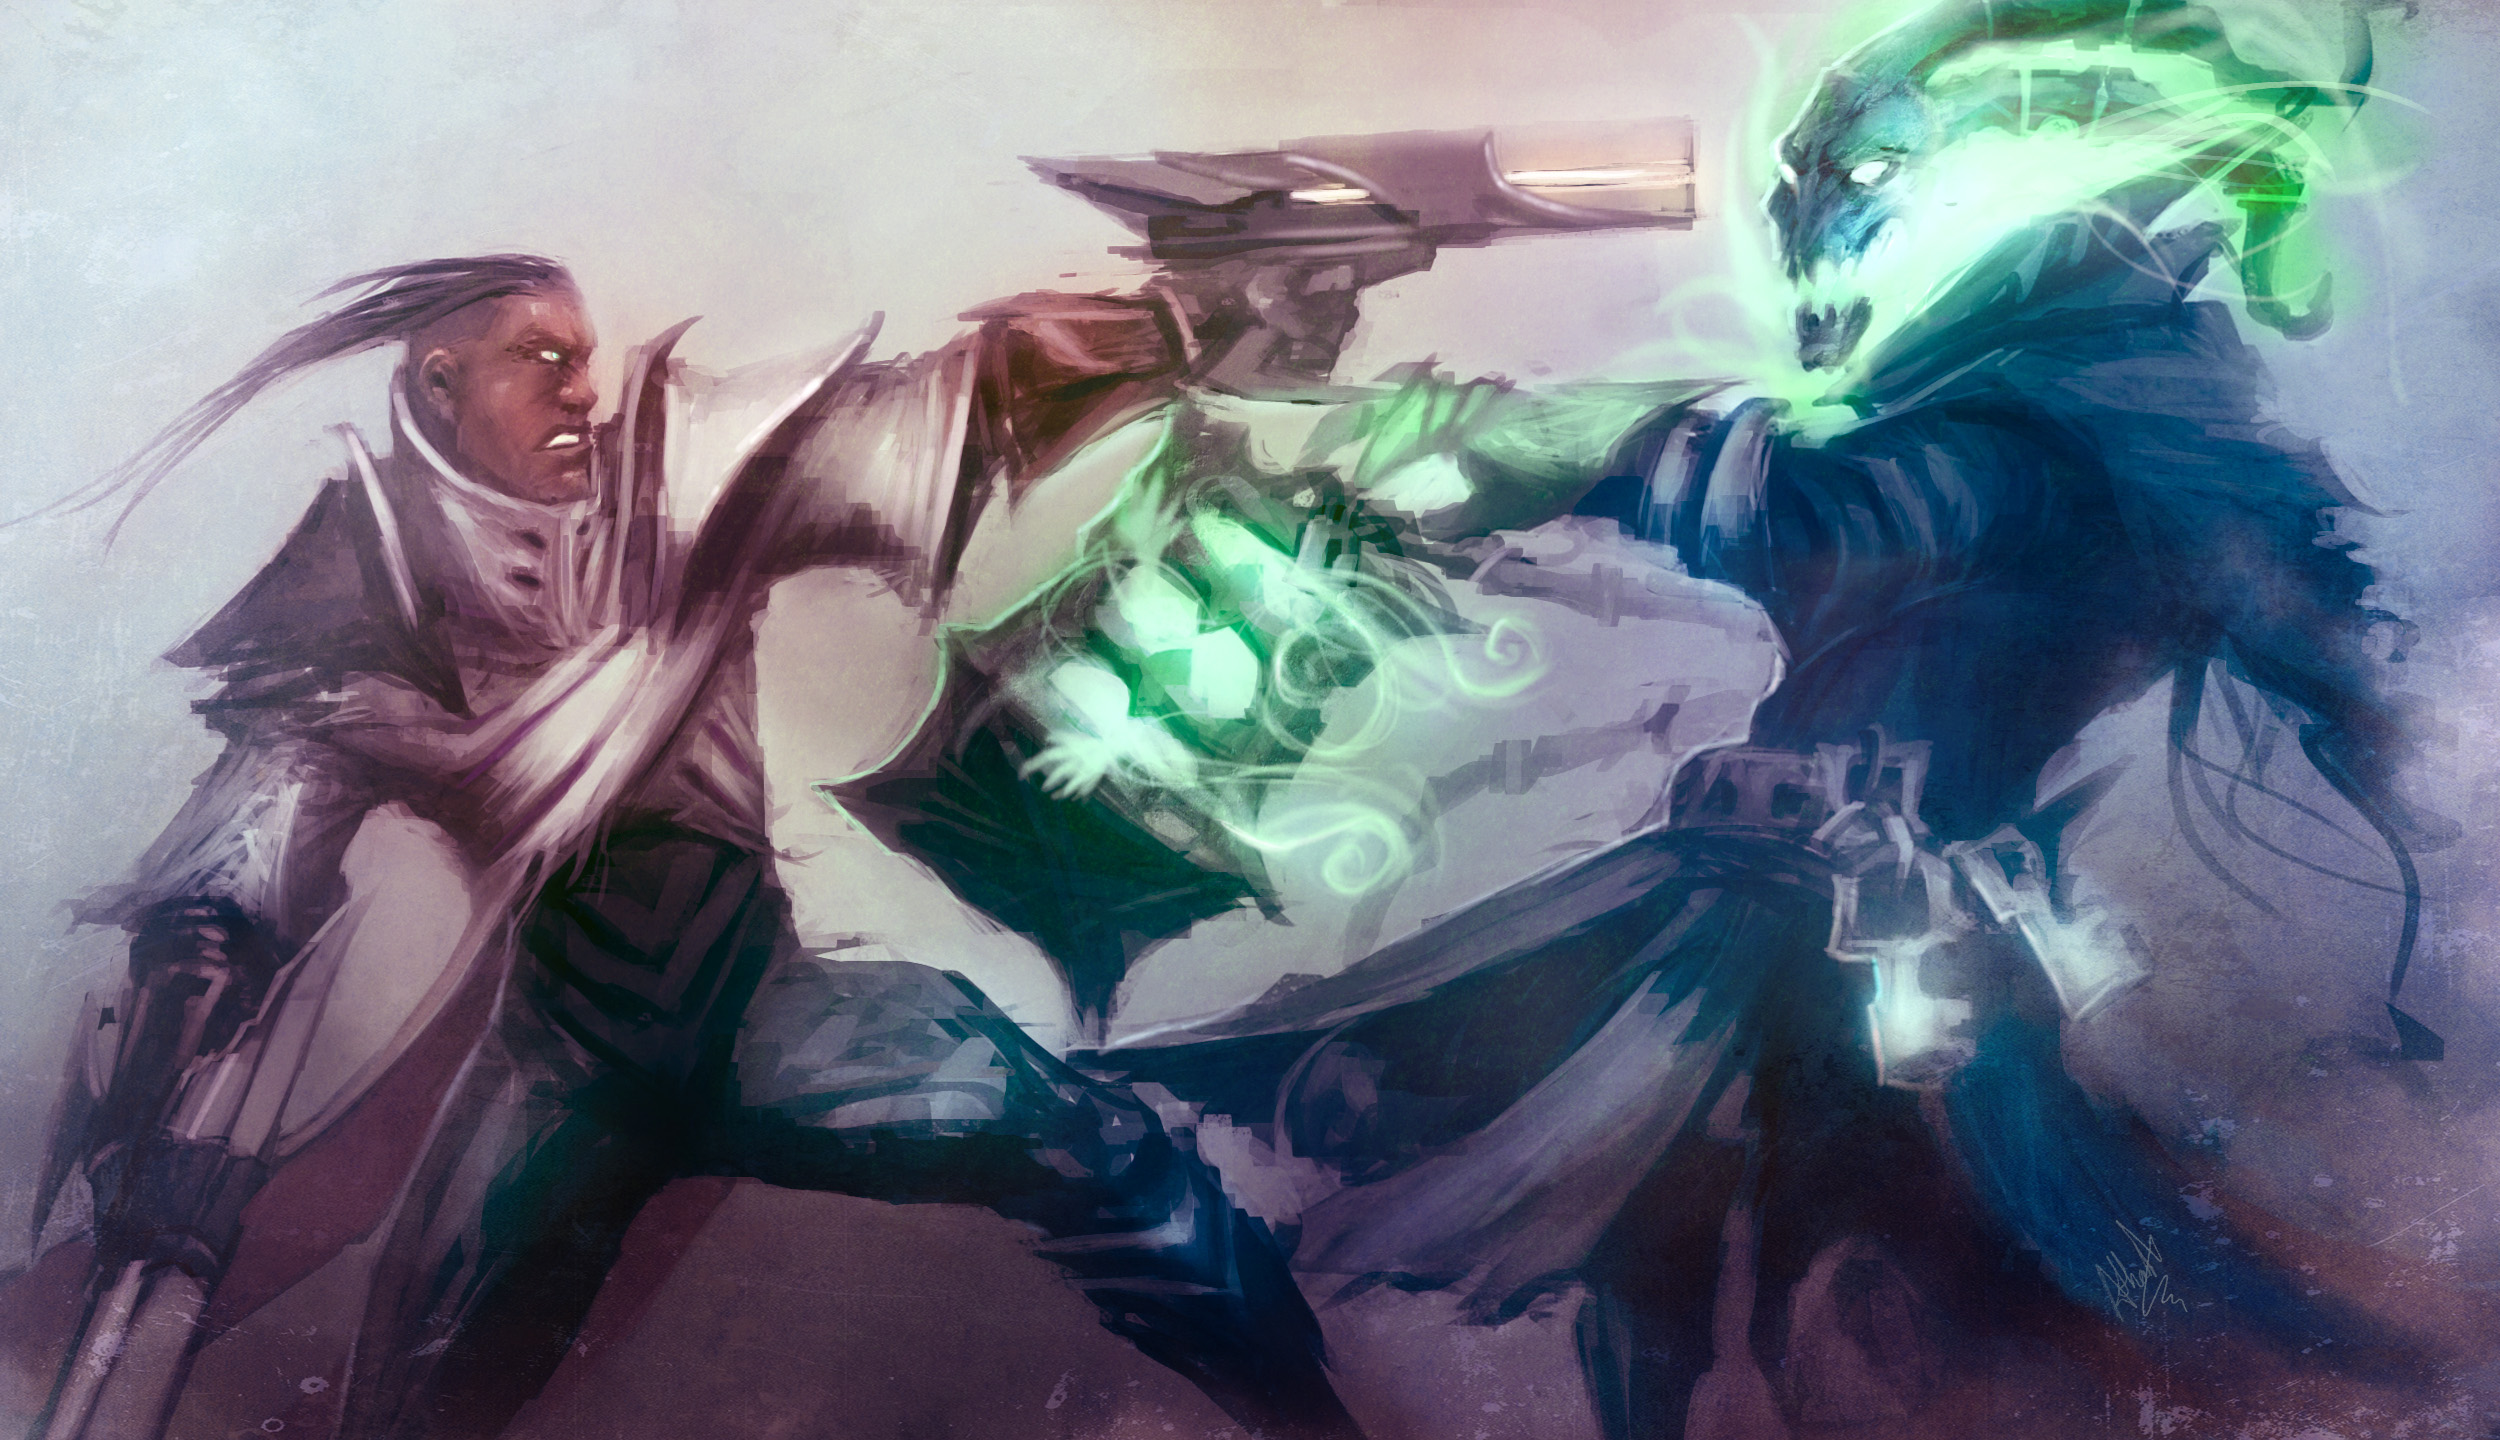 Lucian Vs Thresh Lolwallpapers Images, Photos, Reviews